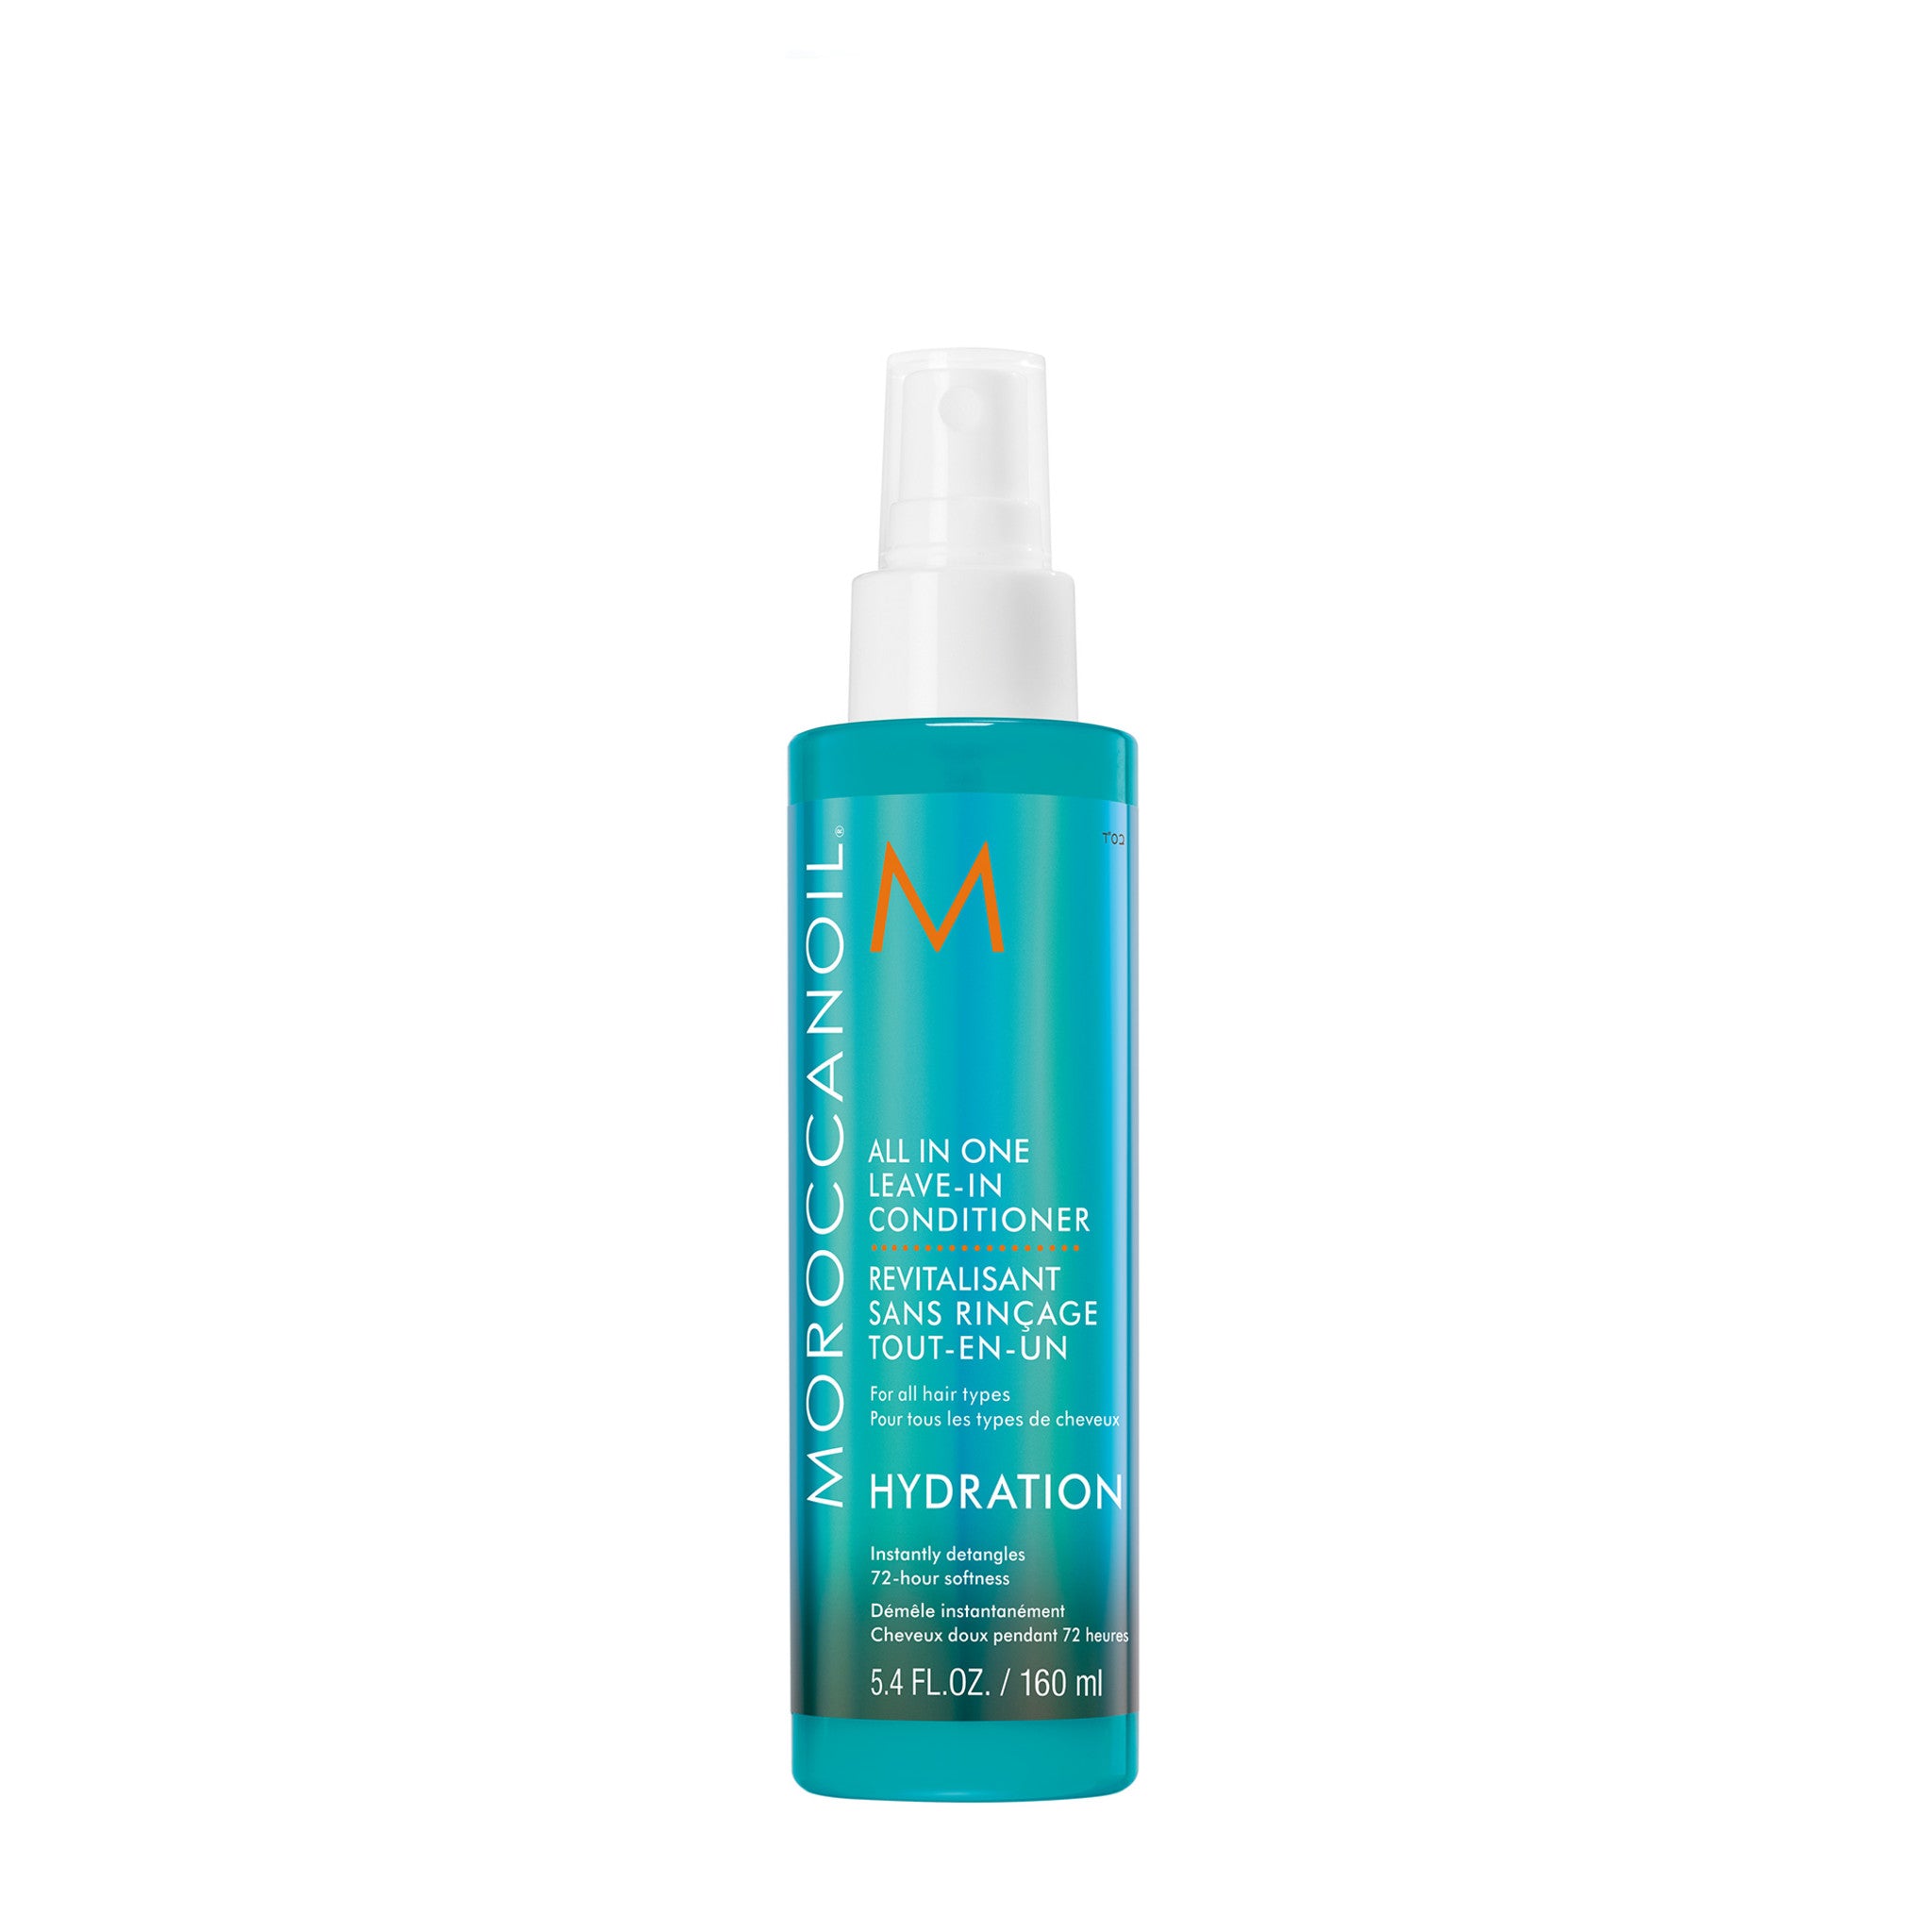 Moroccanoil All In One Leave-In Conditioner main image.